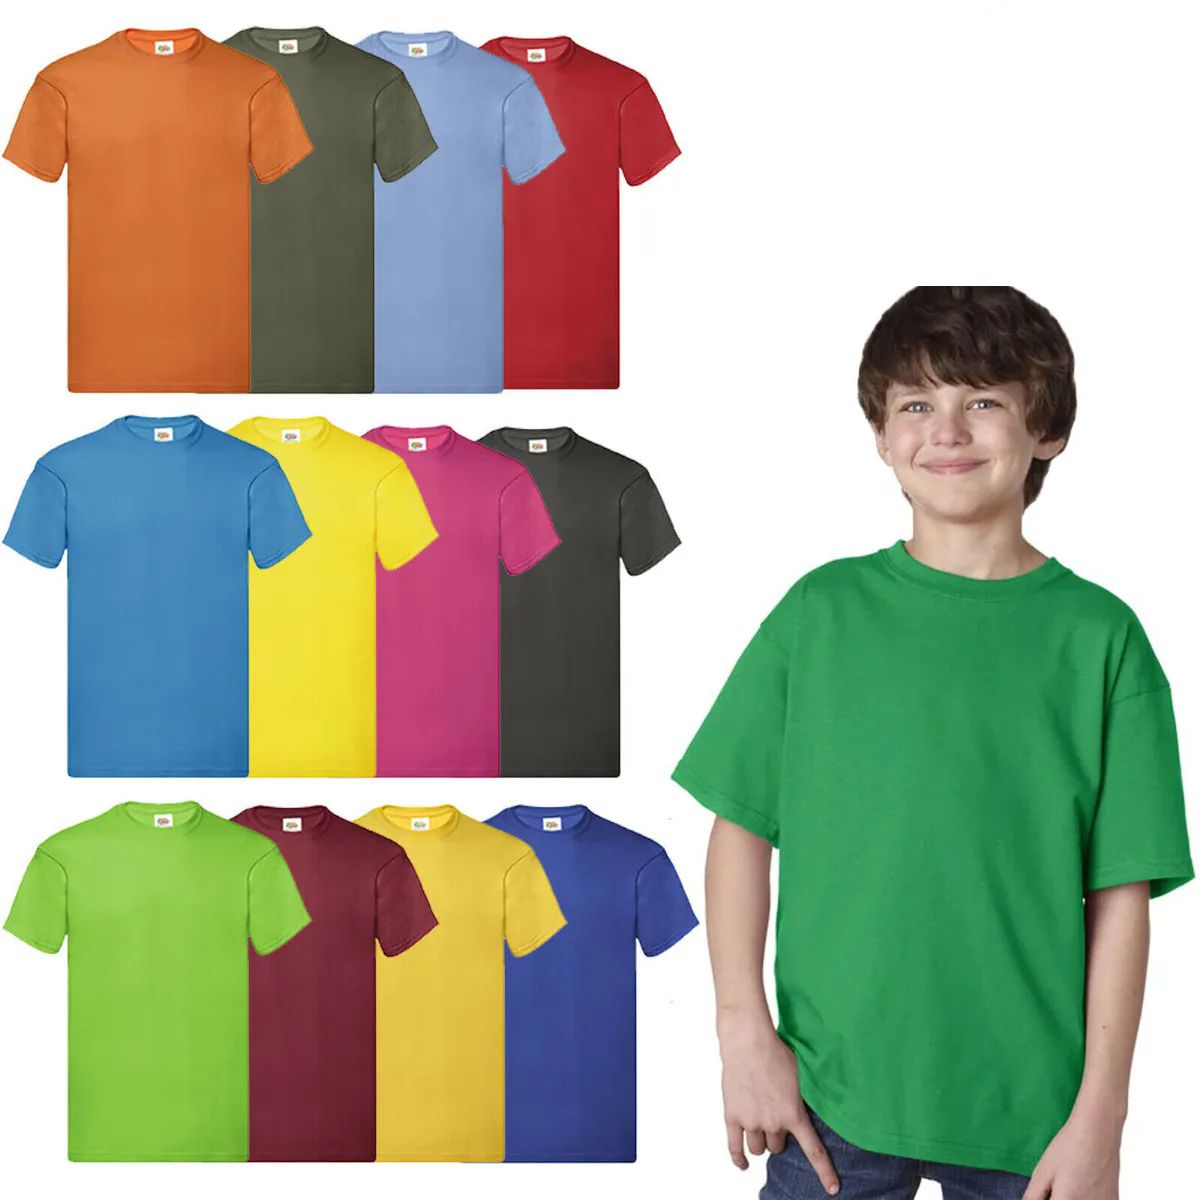 144 Pieces of Billion Hats Kids Youth Cotton Assorted Colors T Shirts Size xs